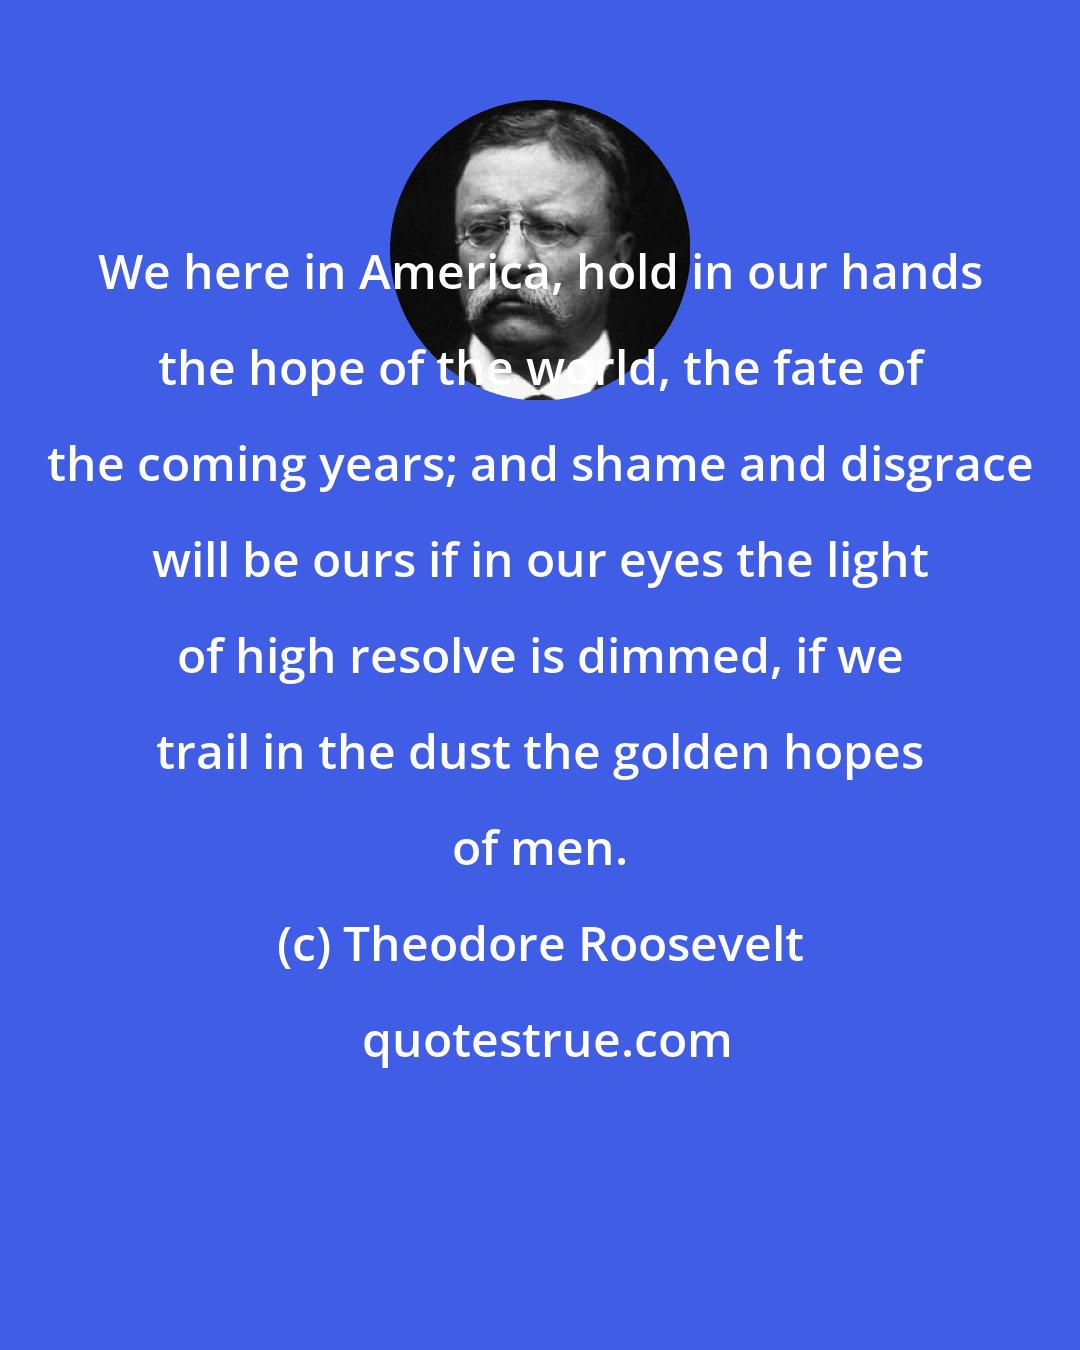 Theodore Roosevelt: We here in America, hold in our hands the hope of the world, the fate of the coming years; and shame and disgrace will be ours if in our eyes the light of high resolve is dimmed, if we trail in the dust the golden hopes of men.